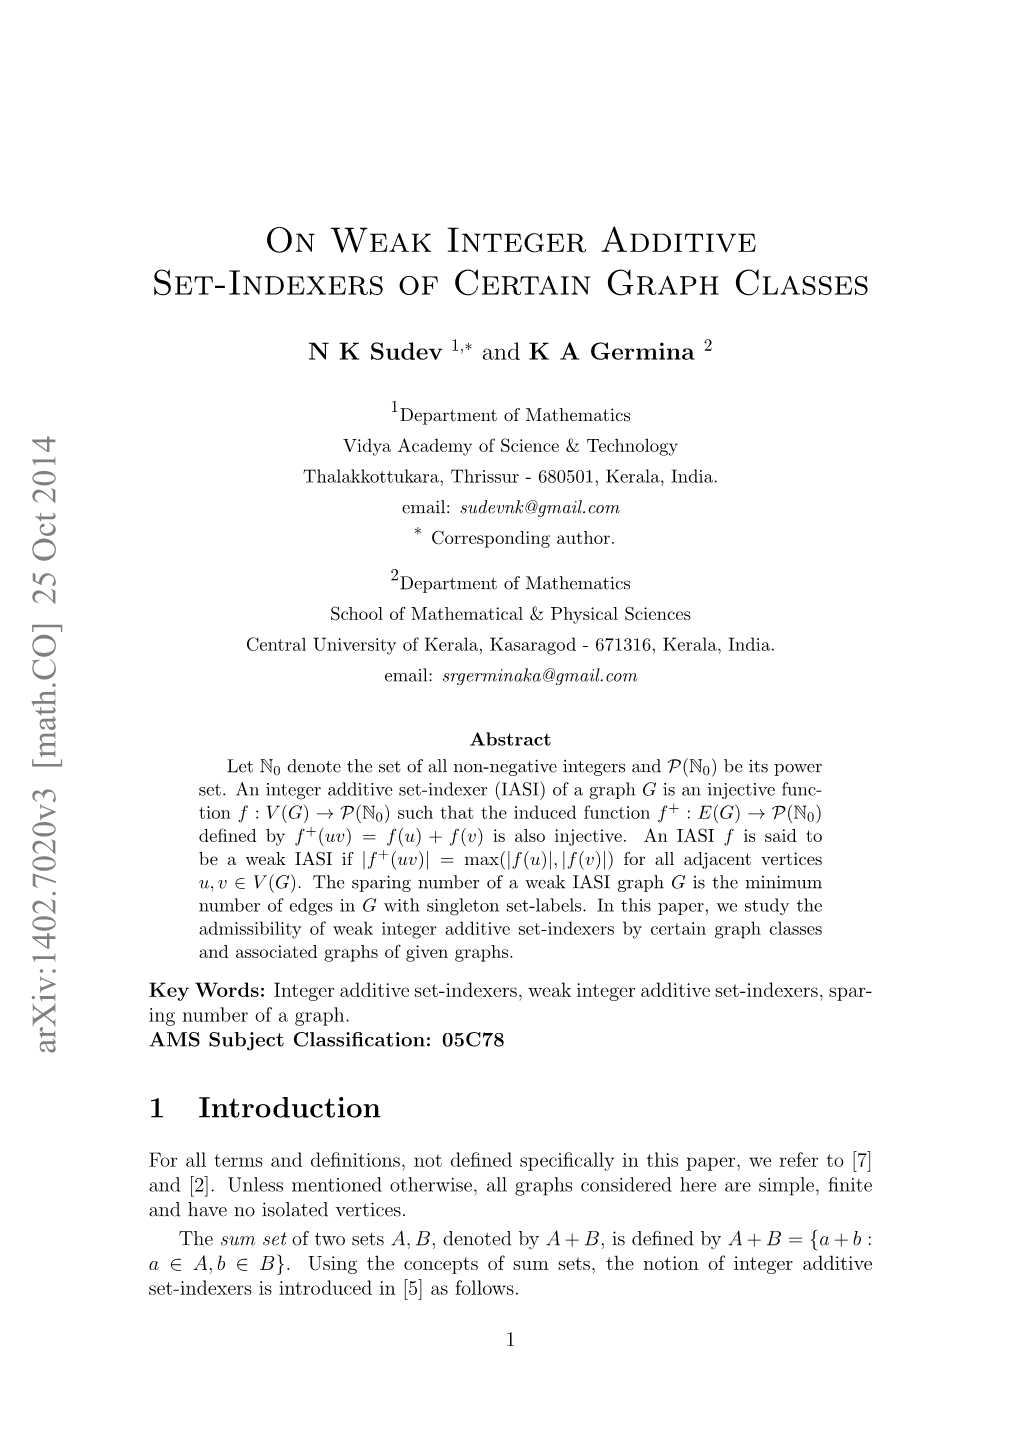 On Weak Integer Additive Set-Indexers of Certain Graph Classes